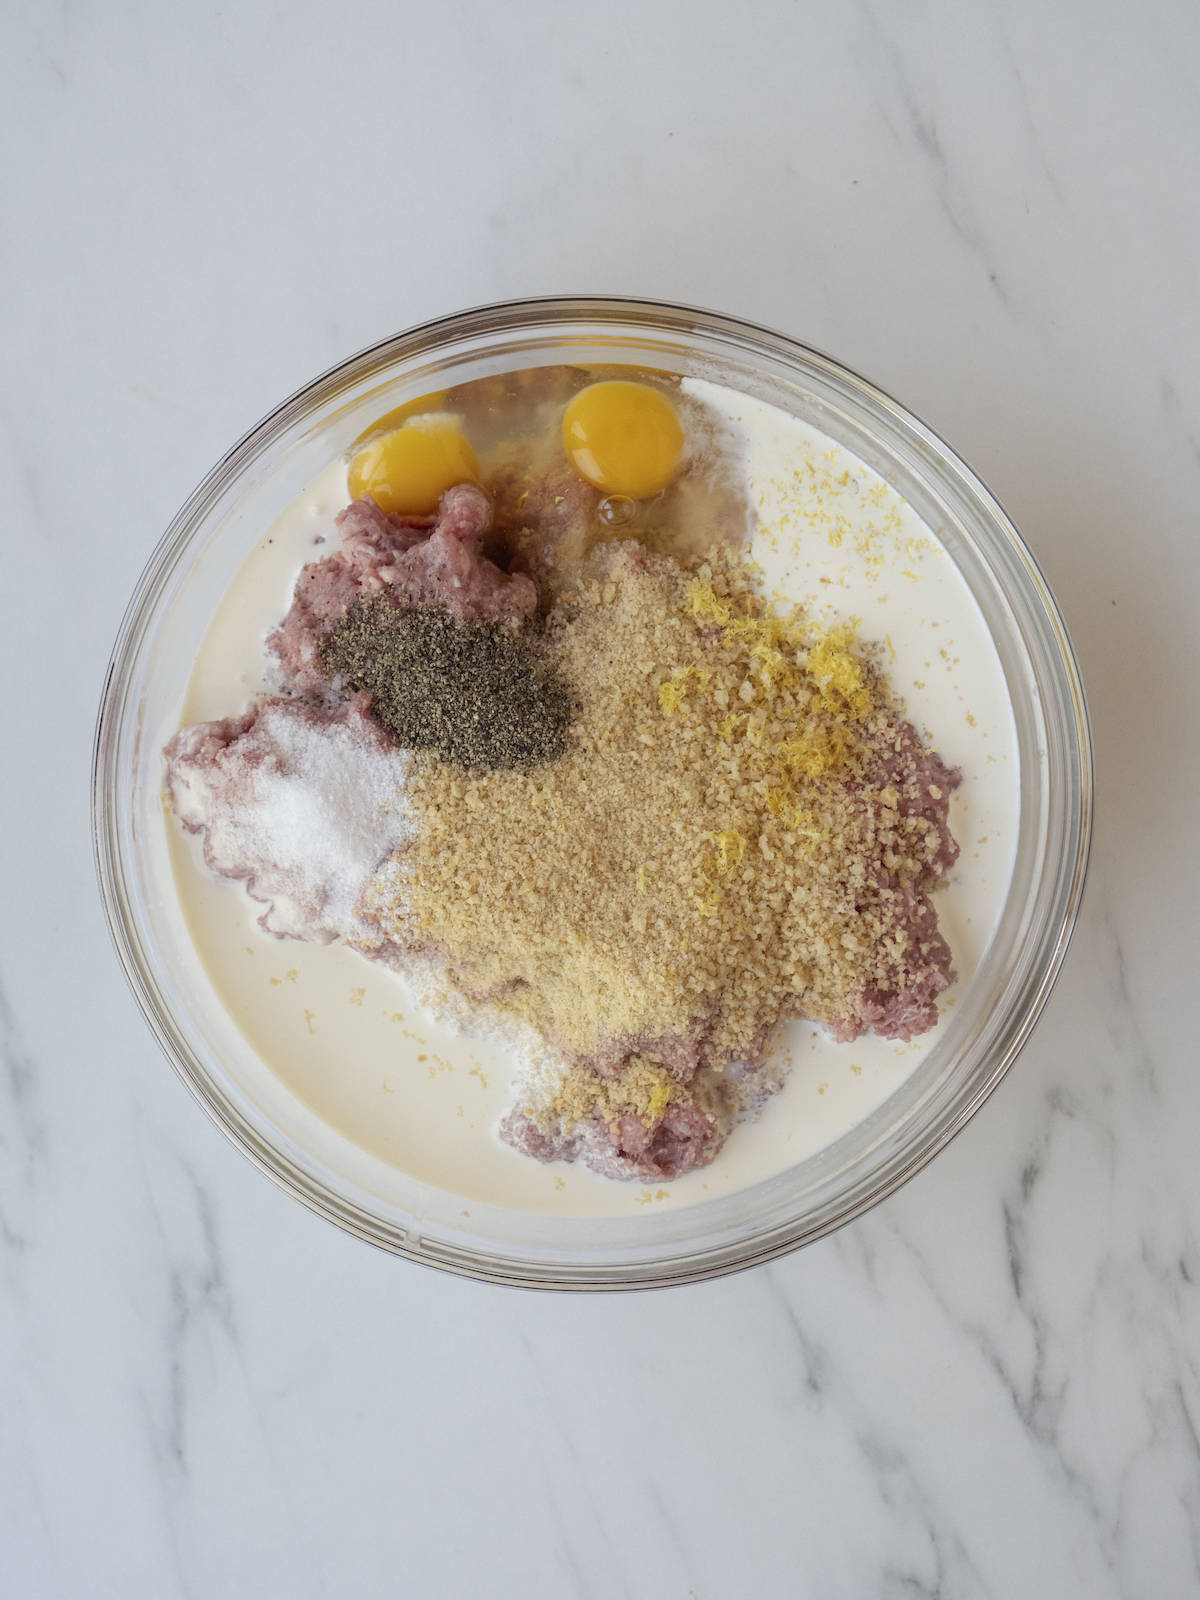 A large glass mixing bowl with ground turkey, ground pork, breadcrumbs, lemon zest, heavy cream, eggs, and salt and pepper.